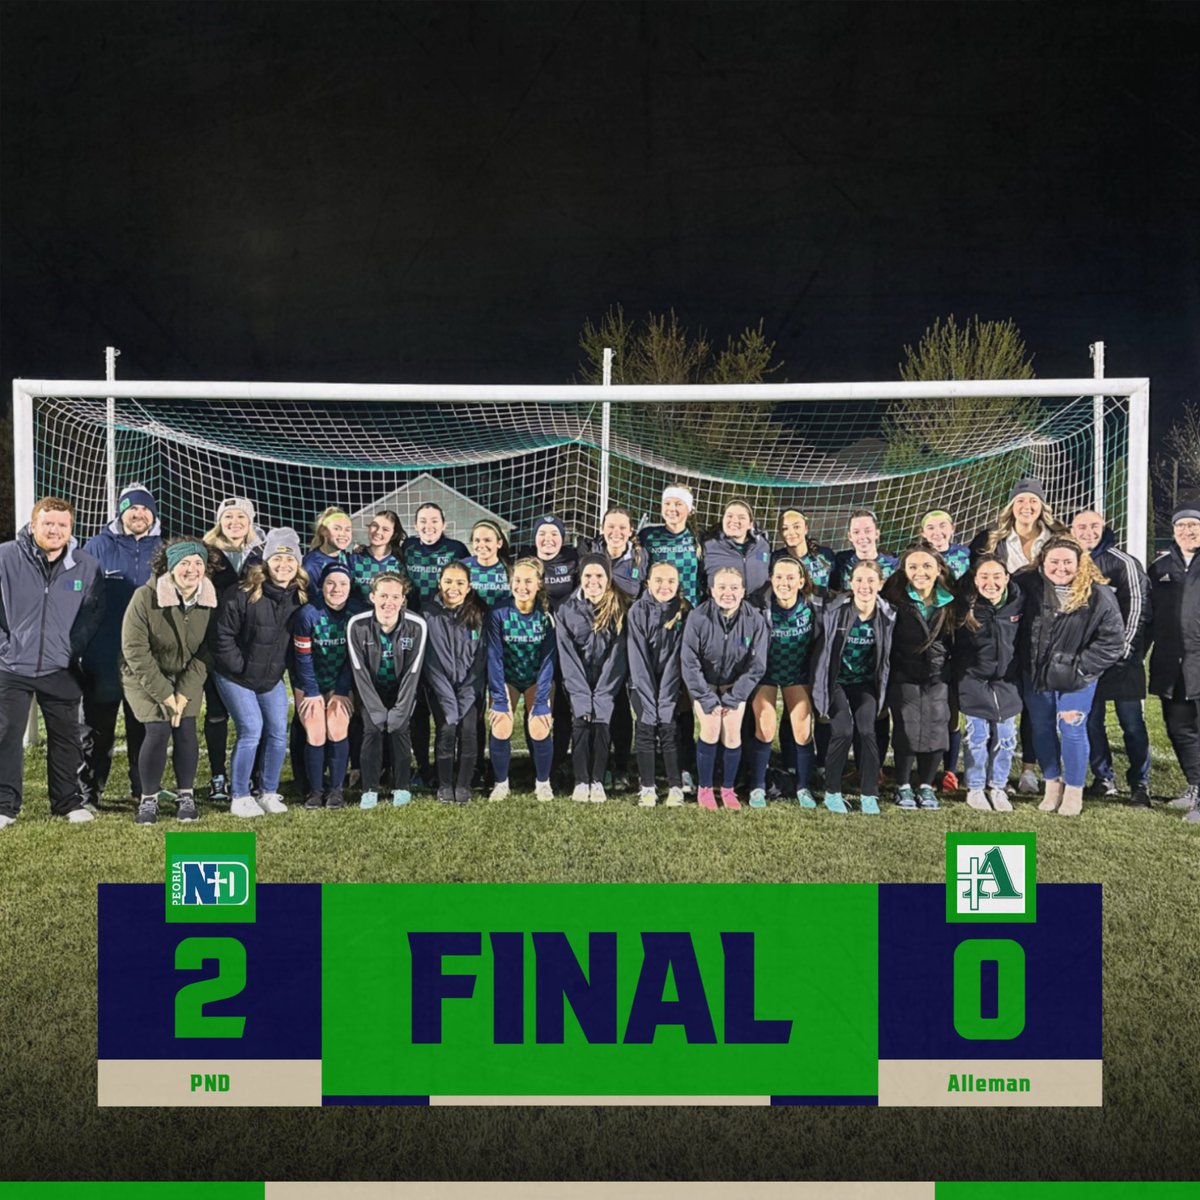 IRISH WIN!!! nice win to finish a busy week against a well-organized Alleman team! Also thank you to our alumni from the 2010 State 4th place team who we honored at halftime for coming out and showing your support! Always apart of the PND soccer family and tradition #PNDsoccer